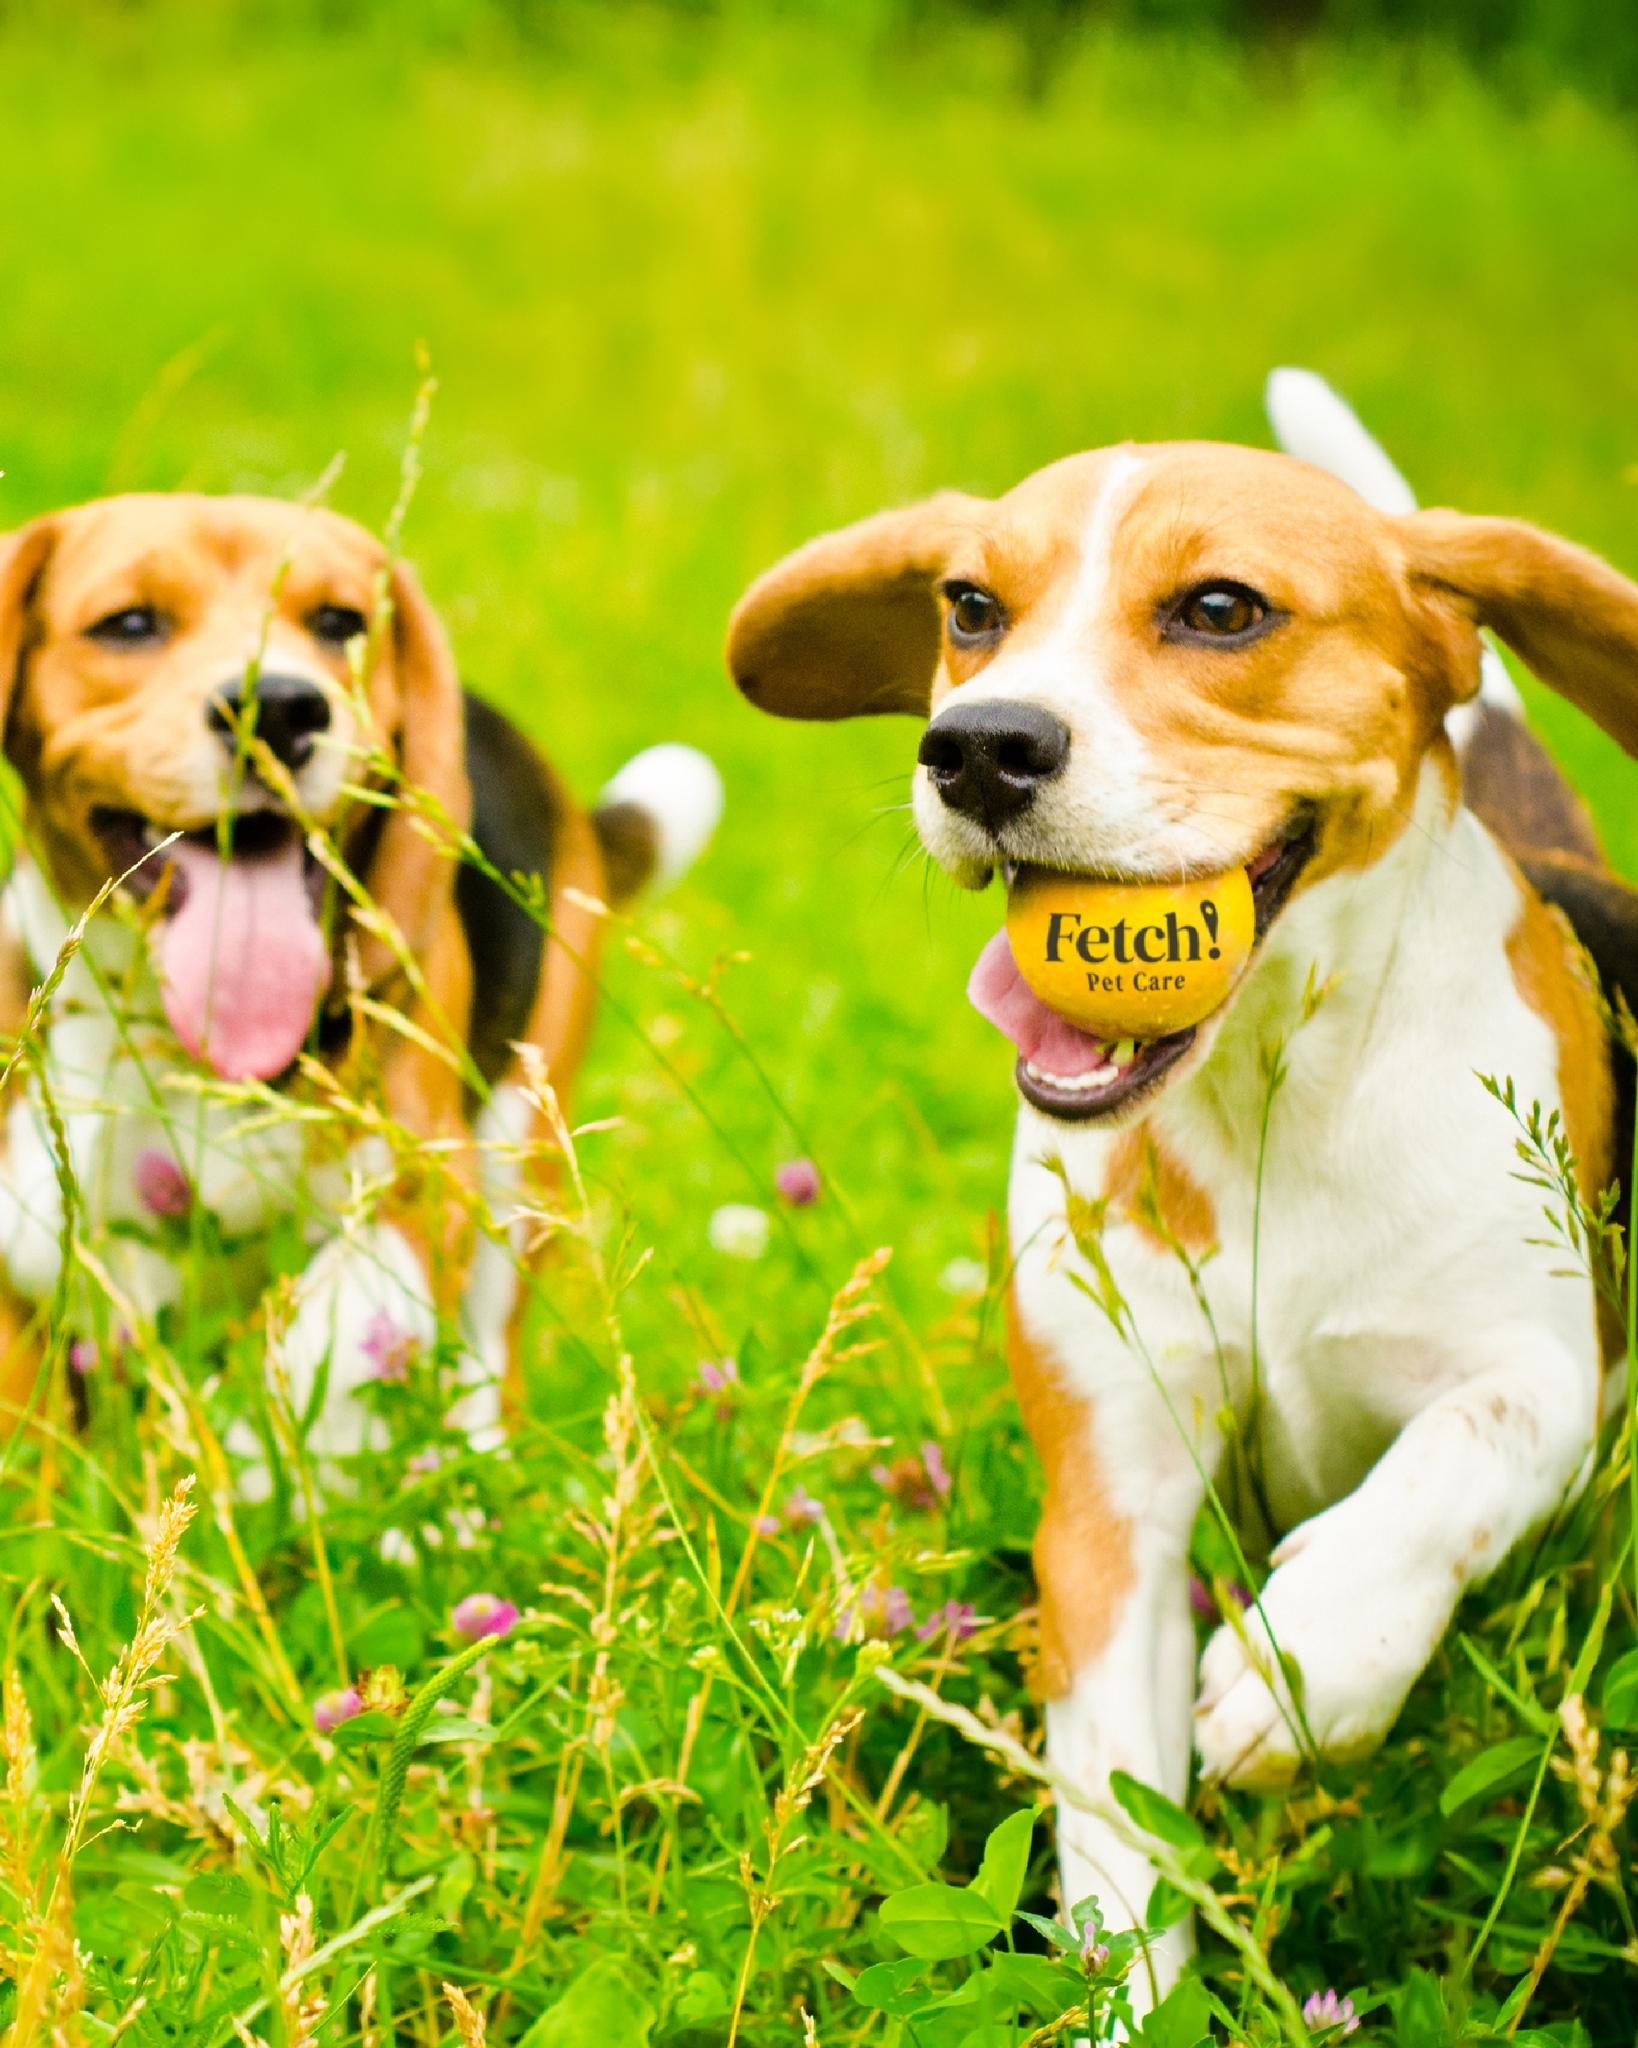 Pet Friendly Fetch! Pet Care of Charlottesville